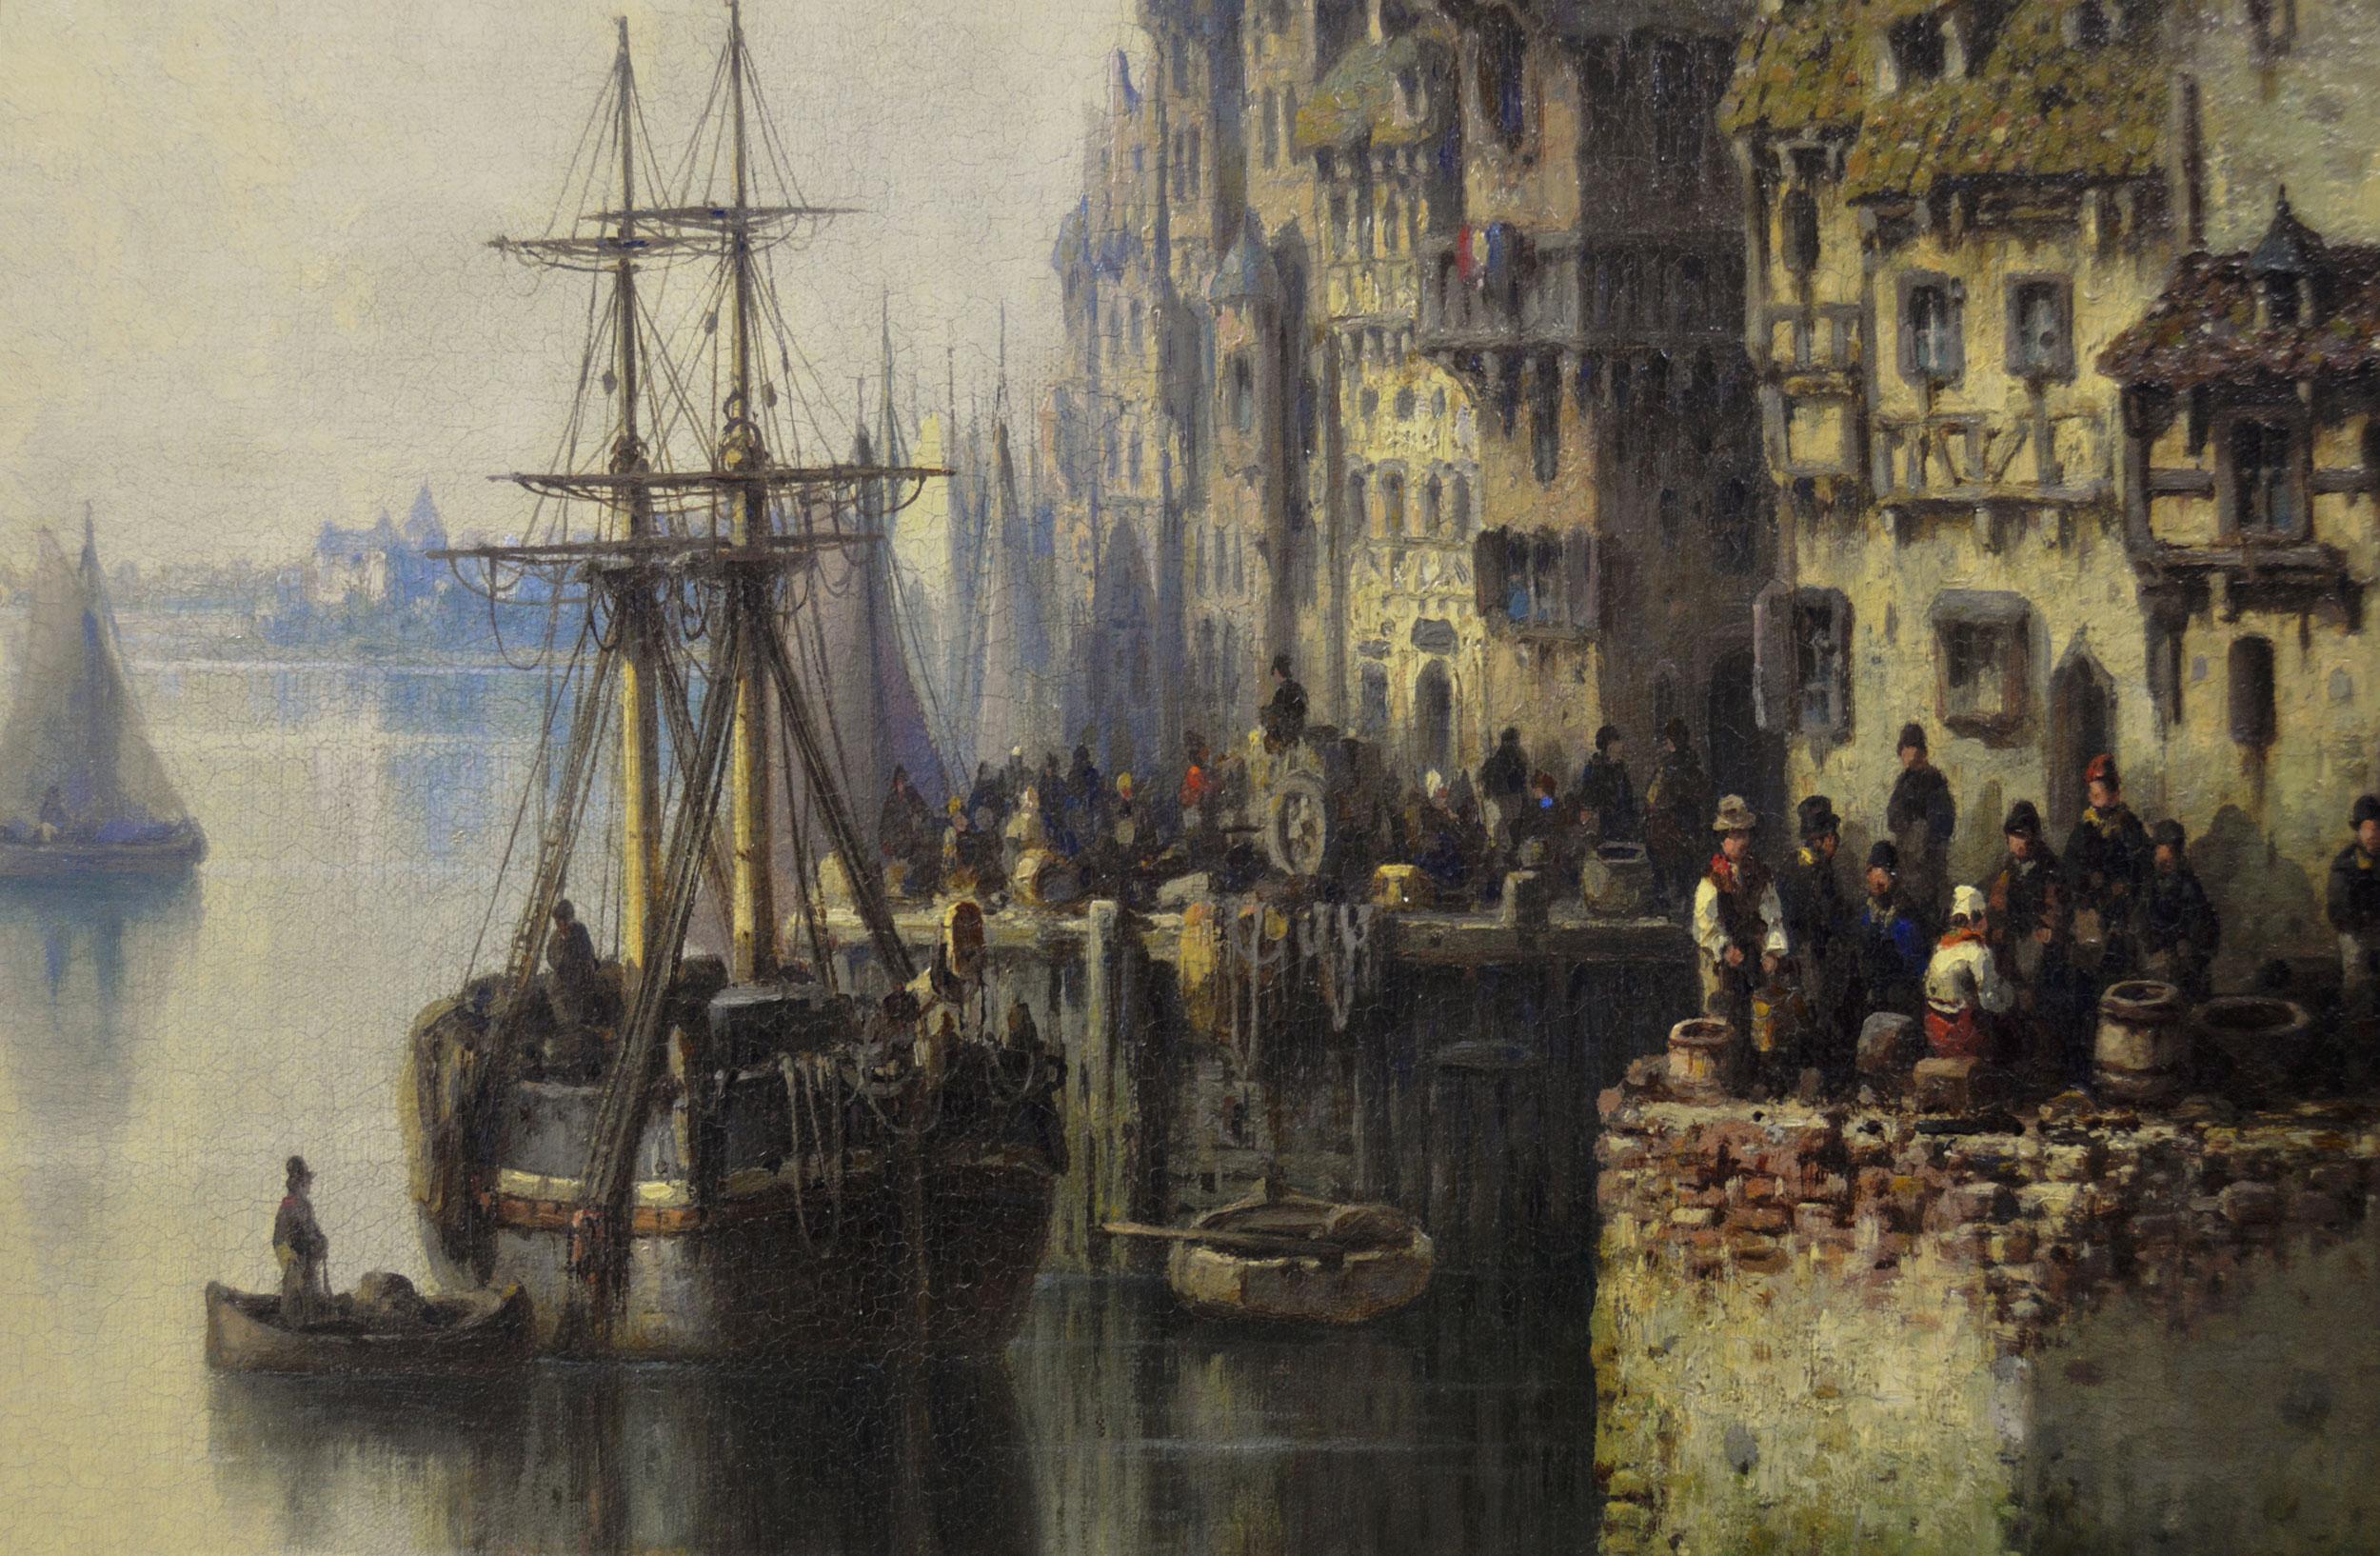 Ludwig Hermann
German, (1812-1881)
A Bustling Harbour Town
Oil on canvas, signed & dated 1863
Image size: 26 inches x 36.5 inches 
Size including frame: 35.25 inches x 45.75 inches

A wonderful continental townscape scene of a bustling harbour by